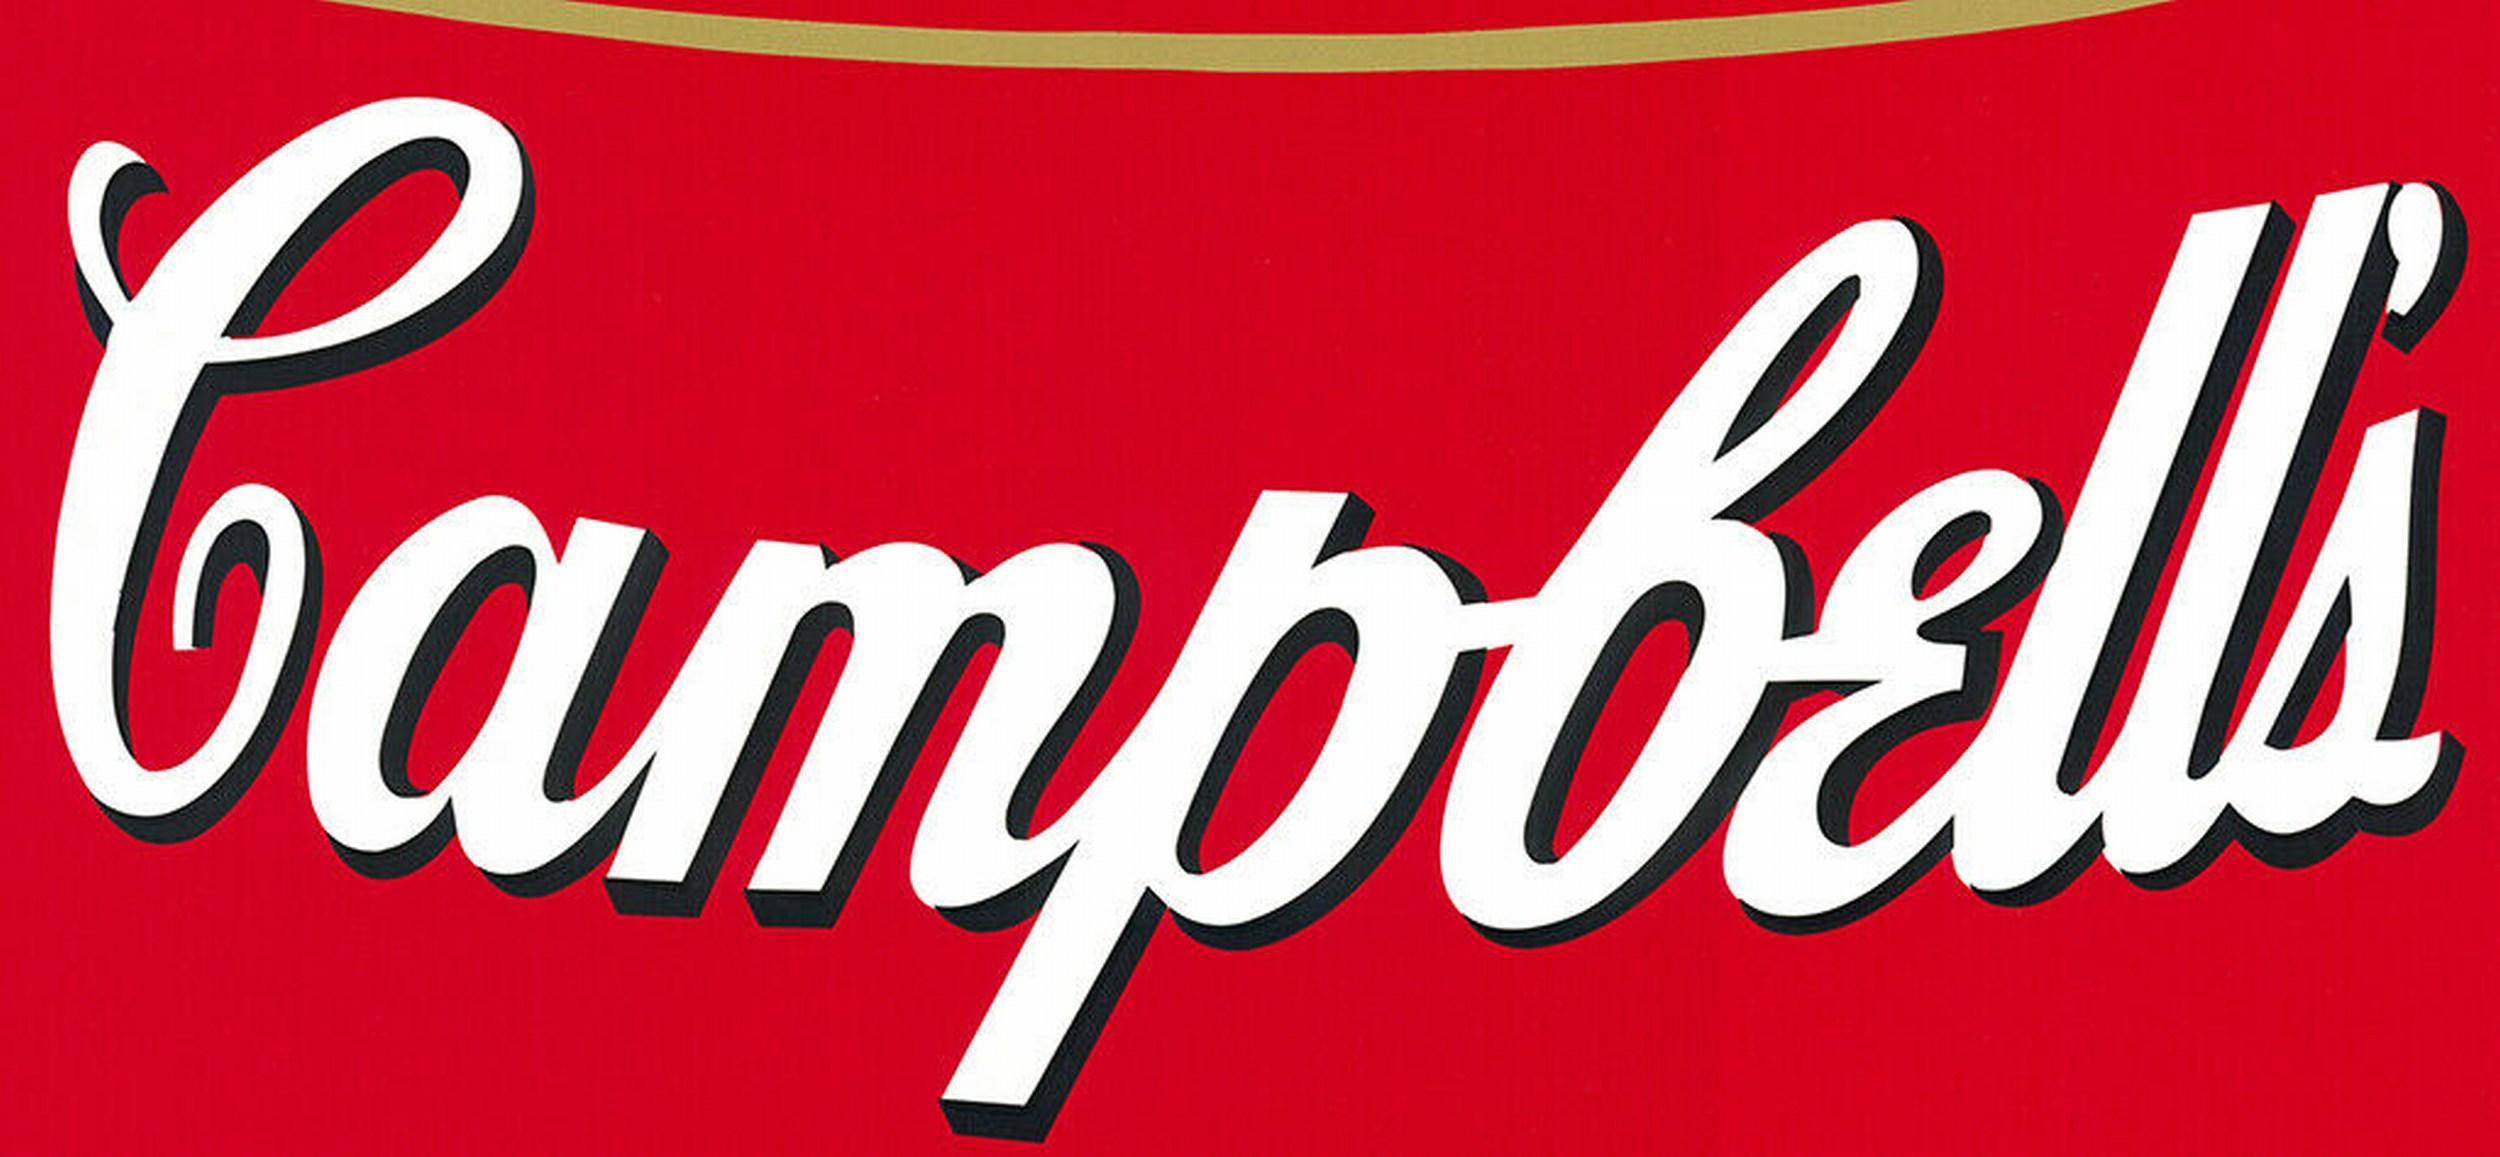 Campbell´s Tomato Soup (Andy Warhol, Pop Art) $45 SHIPPING U.S. only (not $499!) 1